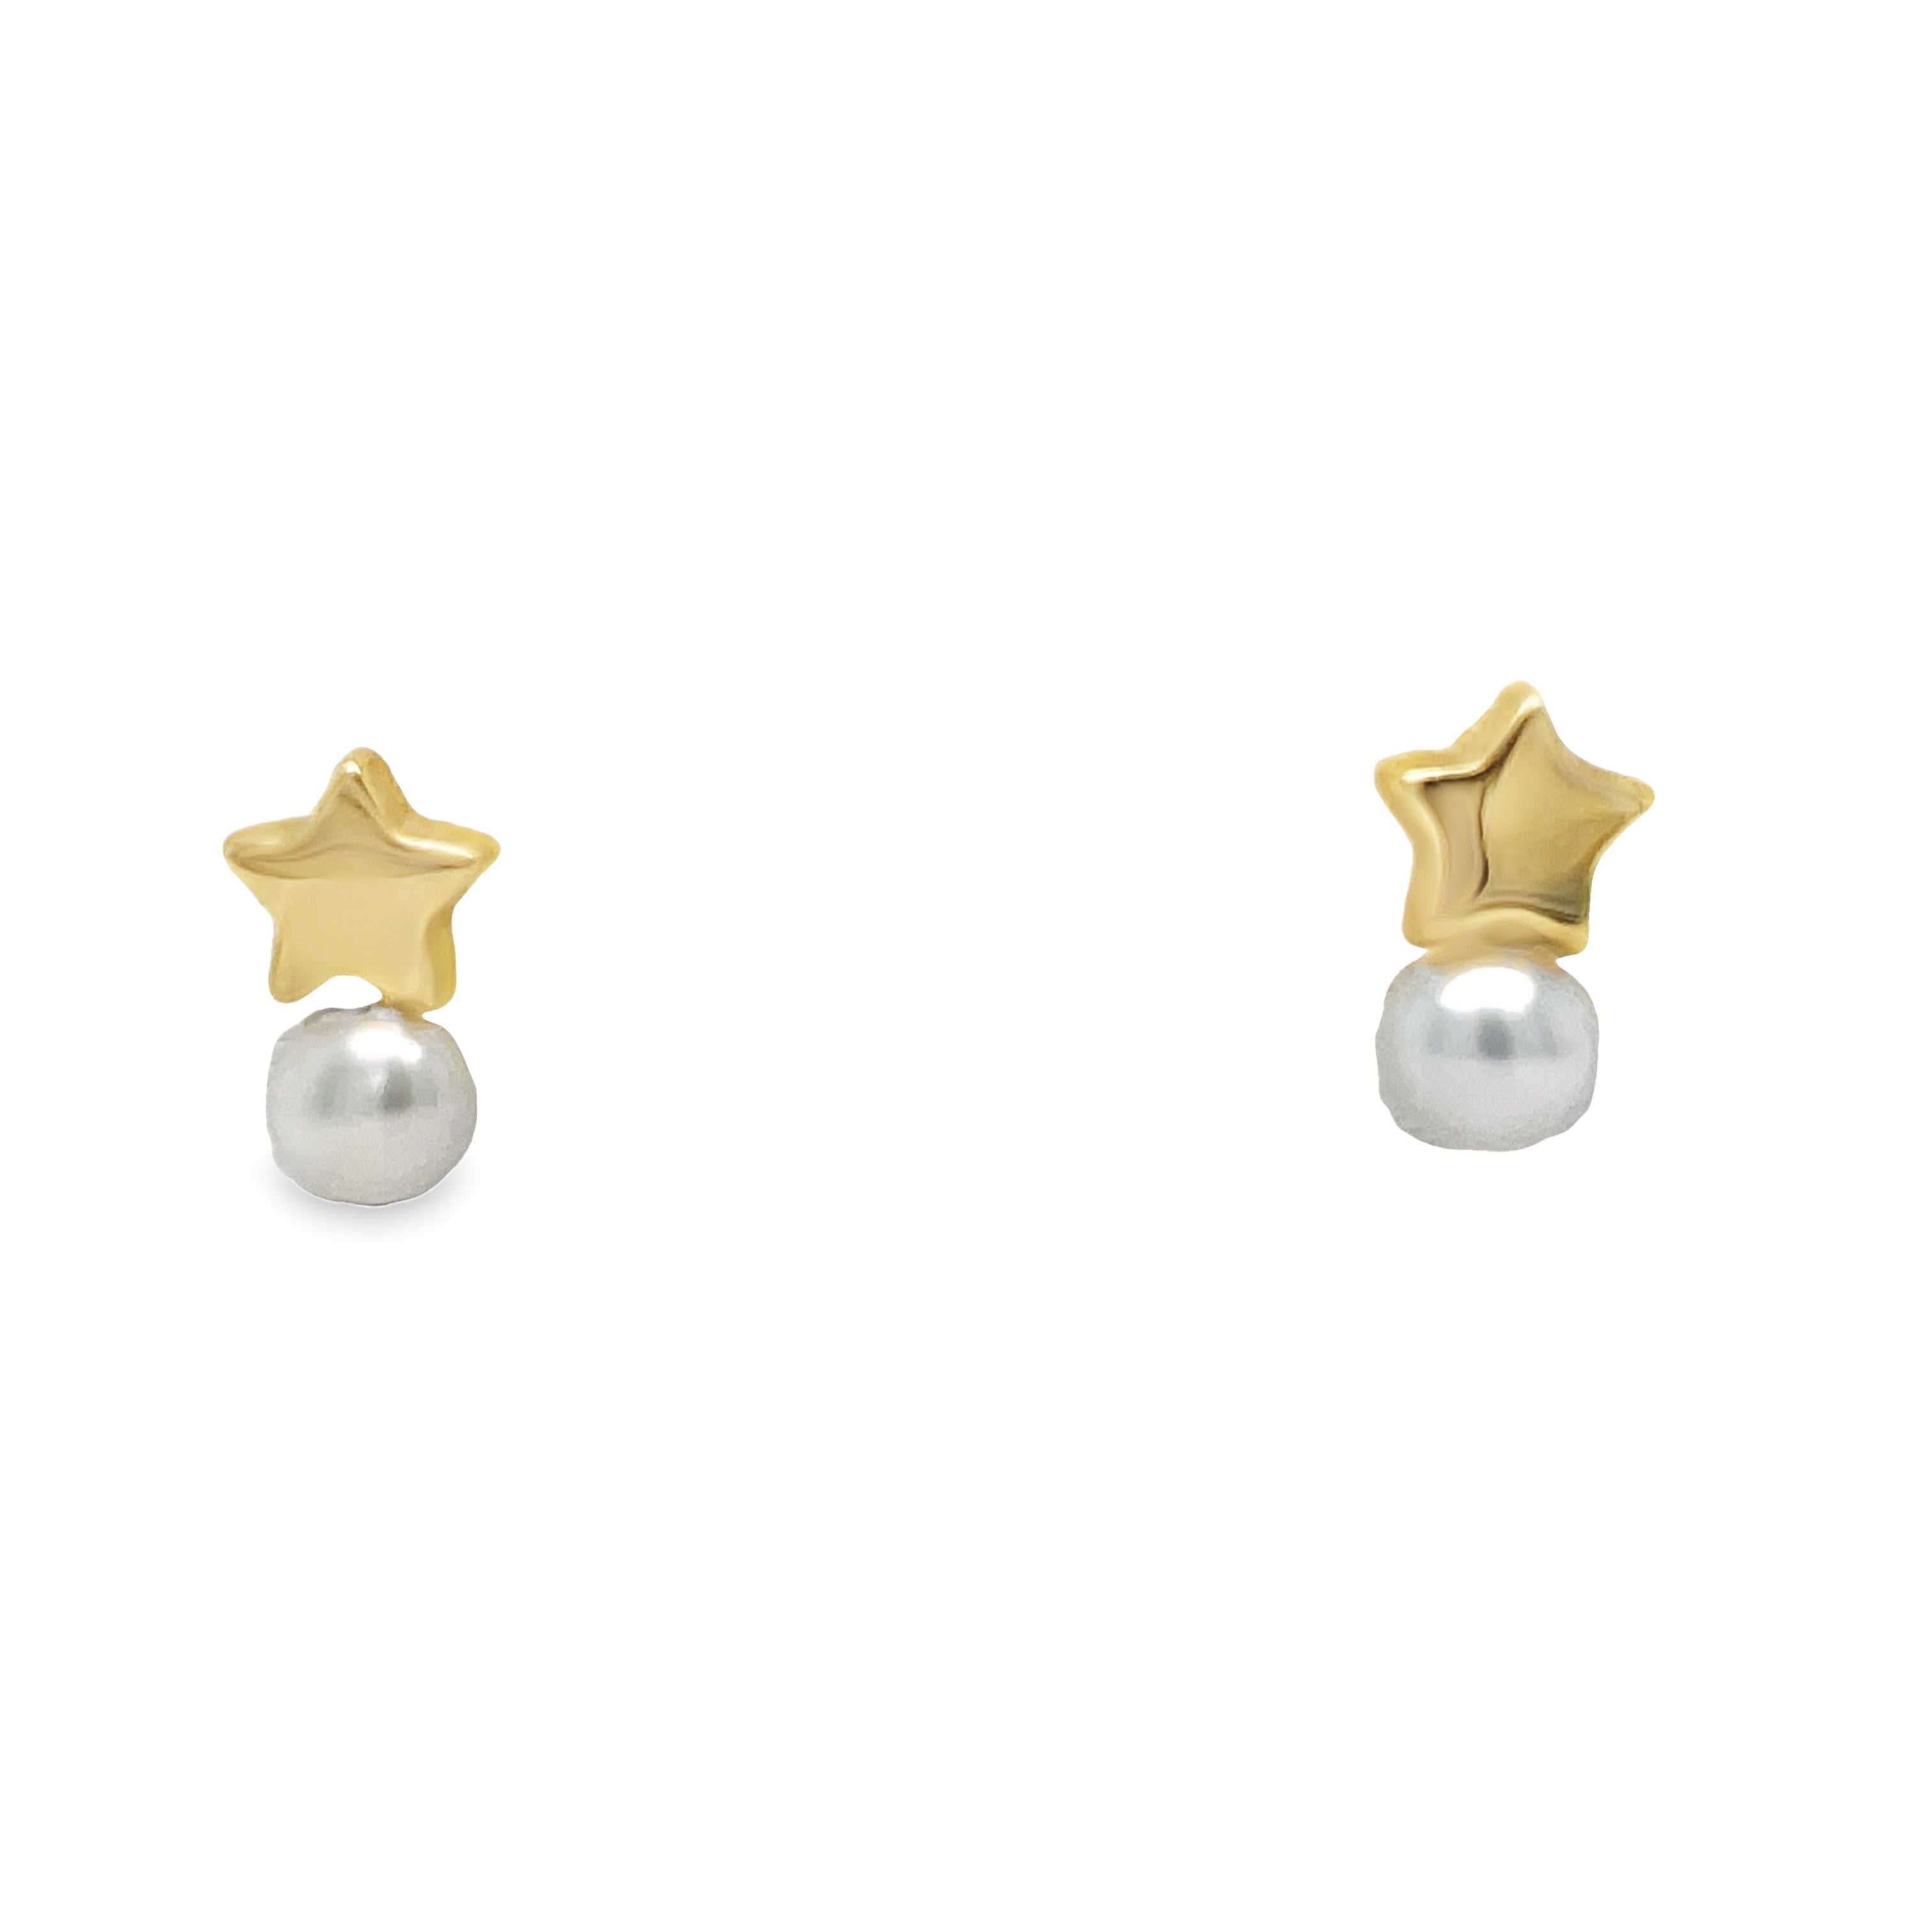 <p><span style="font-size: 0.875rem;">These exquisite flower earrings for babies feature 14k yellow gold construction with mother of pearl and gold stars securely affixed using baby screw backs.</span></p> <p>&nbsp;</p>